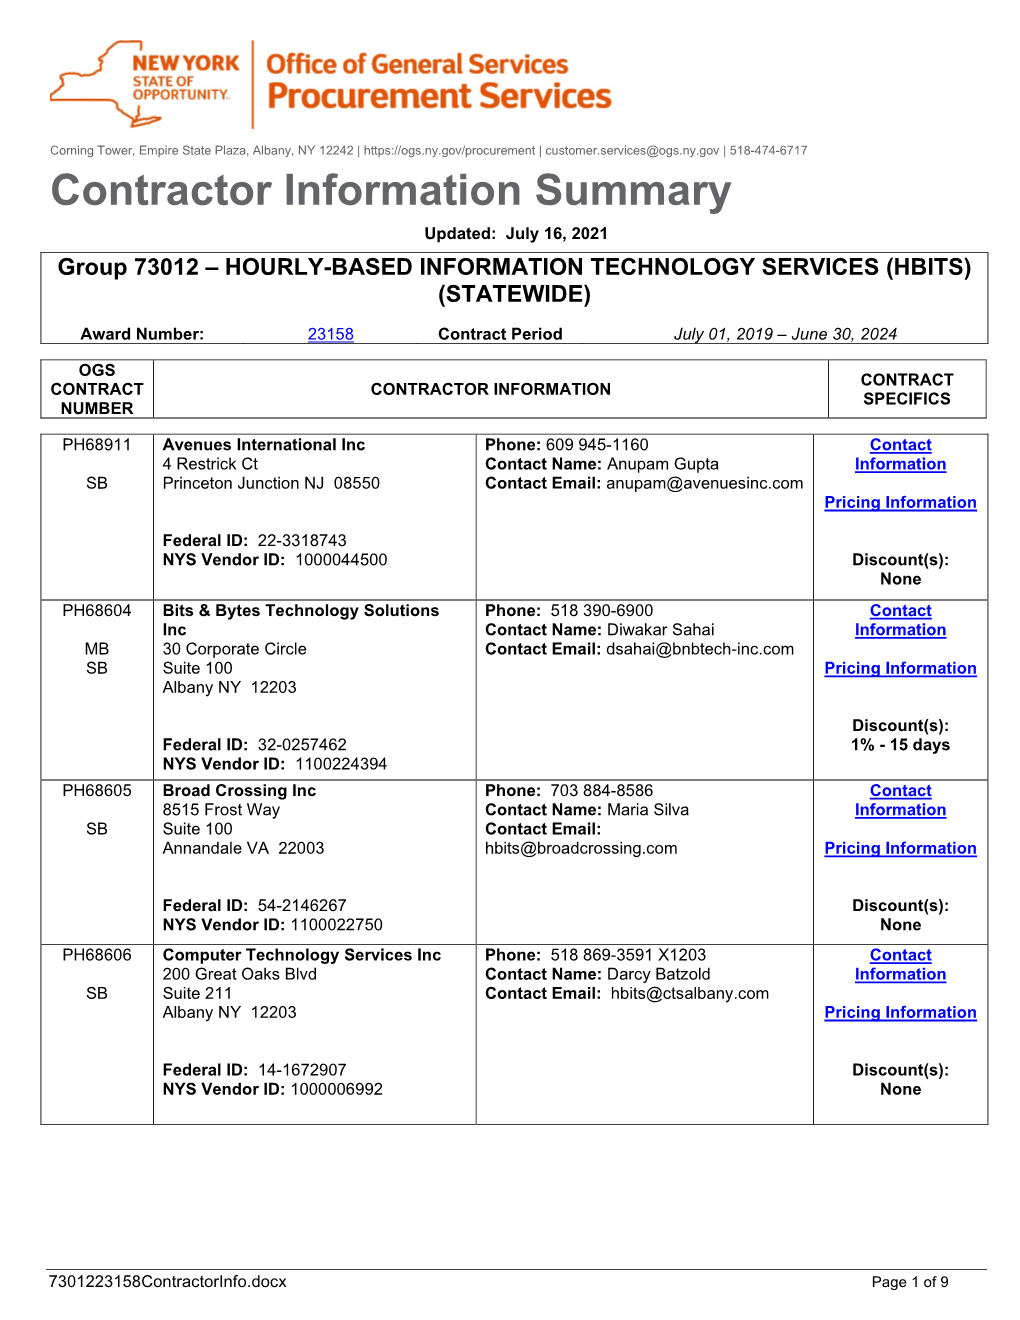 73012 23158 HBITS, Contractor Information